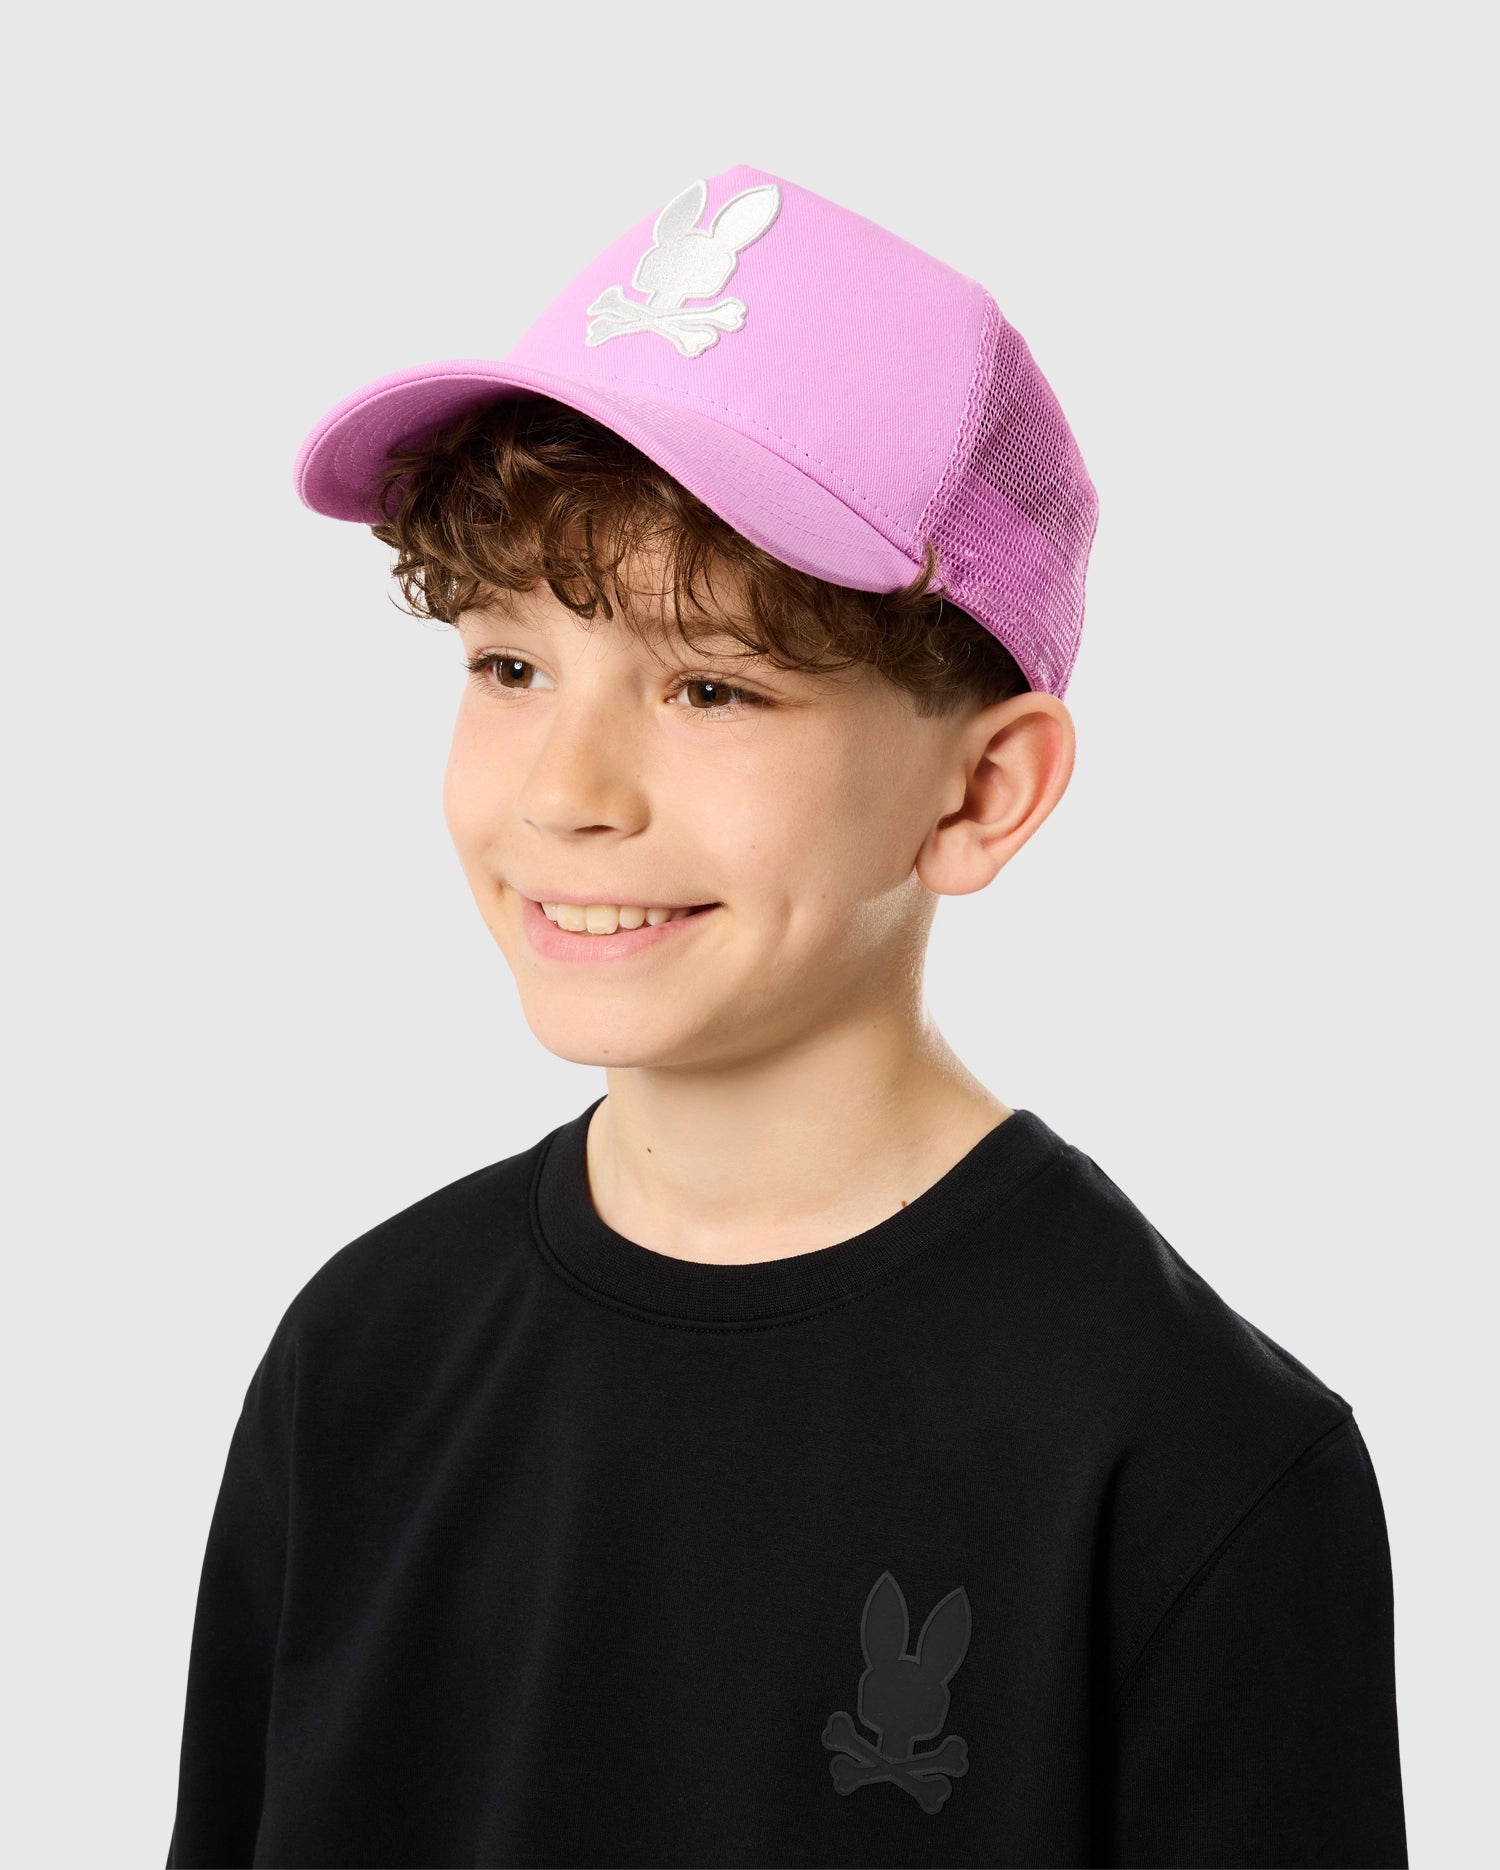 A young boy with curly hair is smiling and looking to the side. He is wearing a black sweatshirt with a small bunny logo on it and a pink Psycho Bunny KIDS HOUSTON TRUCKER HAT - B0A550C2HT featuring a similar white bunny logo with crossed bones underneath. The background is plain light grey.